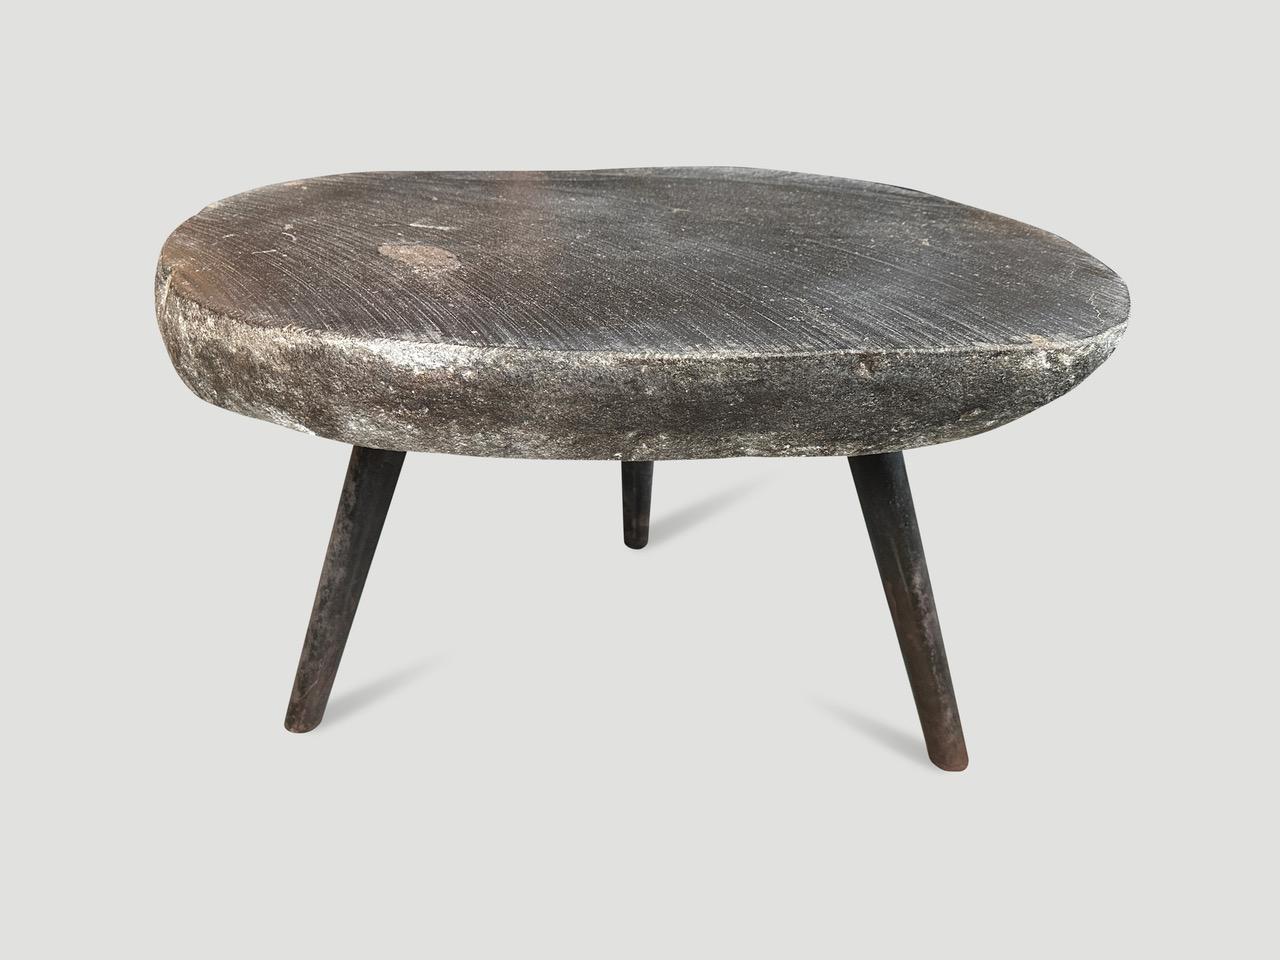 Organic Modern Andrianna Shamaris River Stone Side Table For Sale